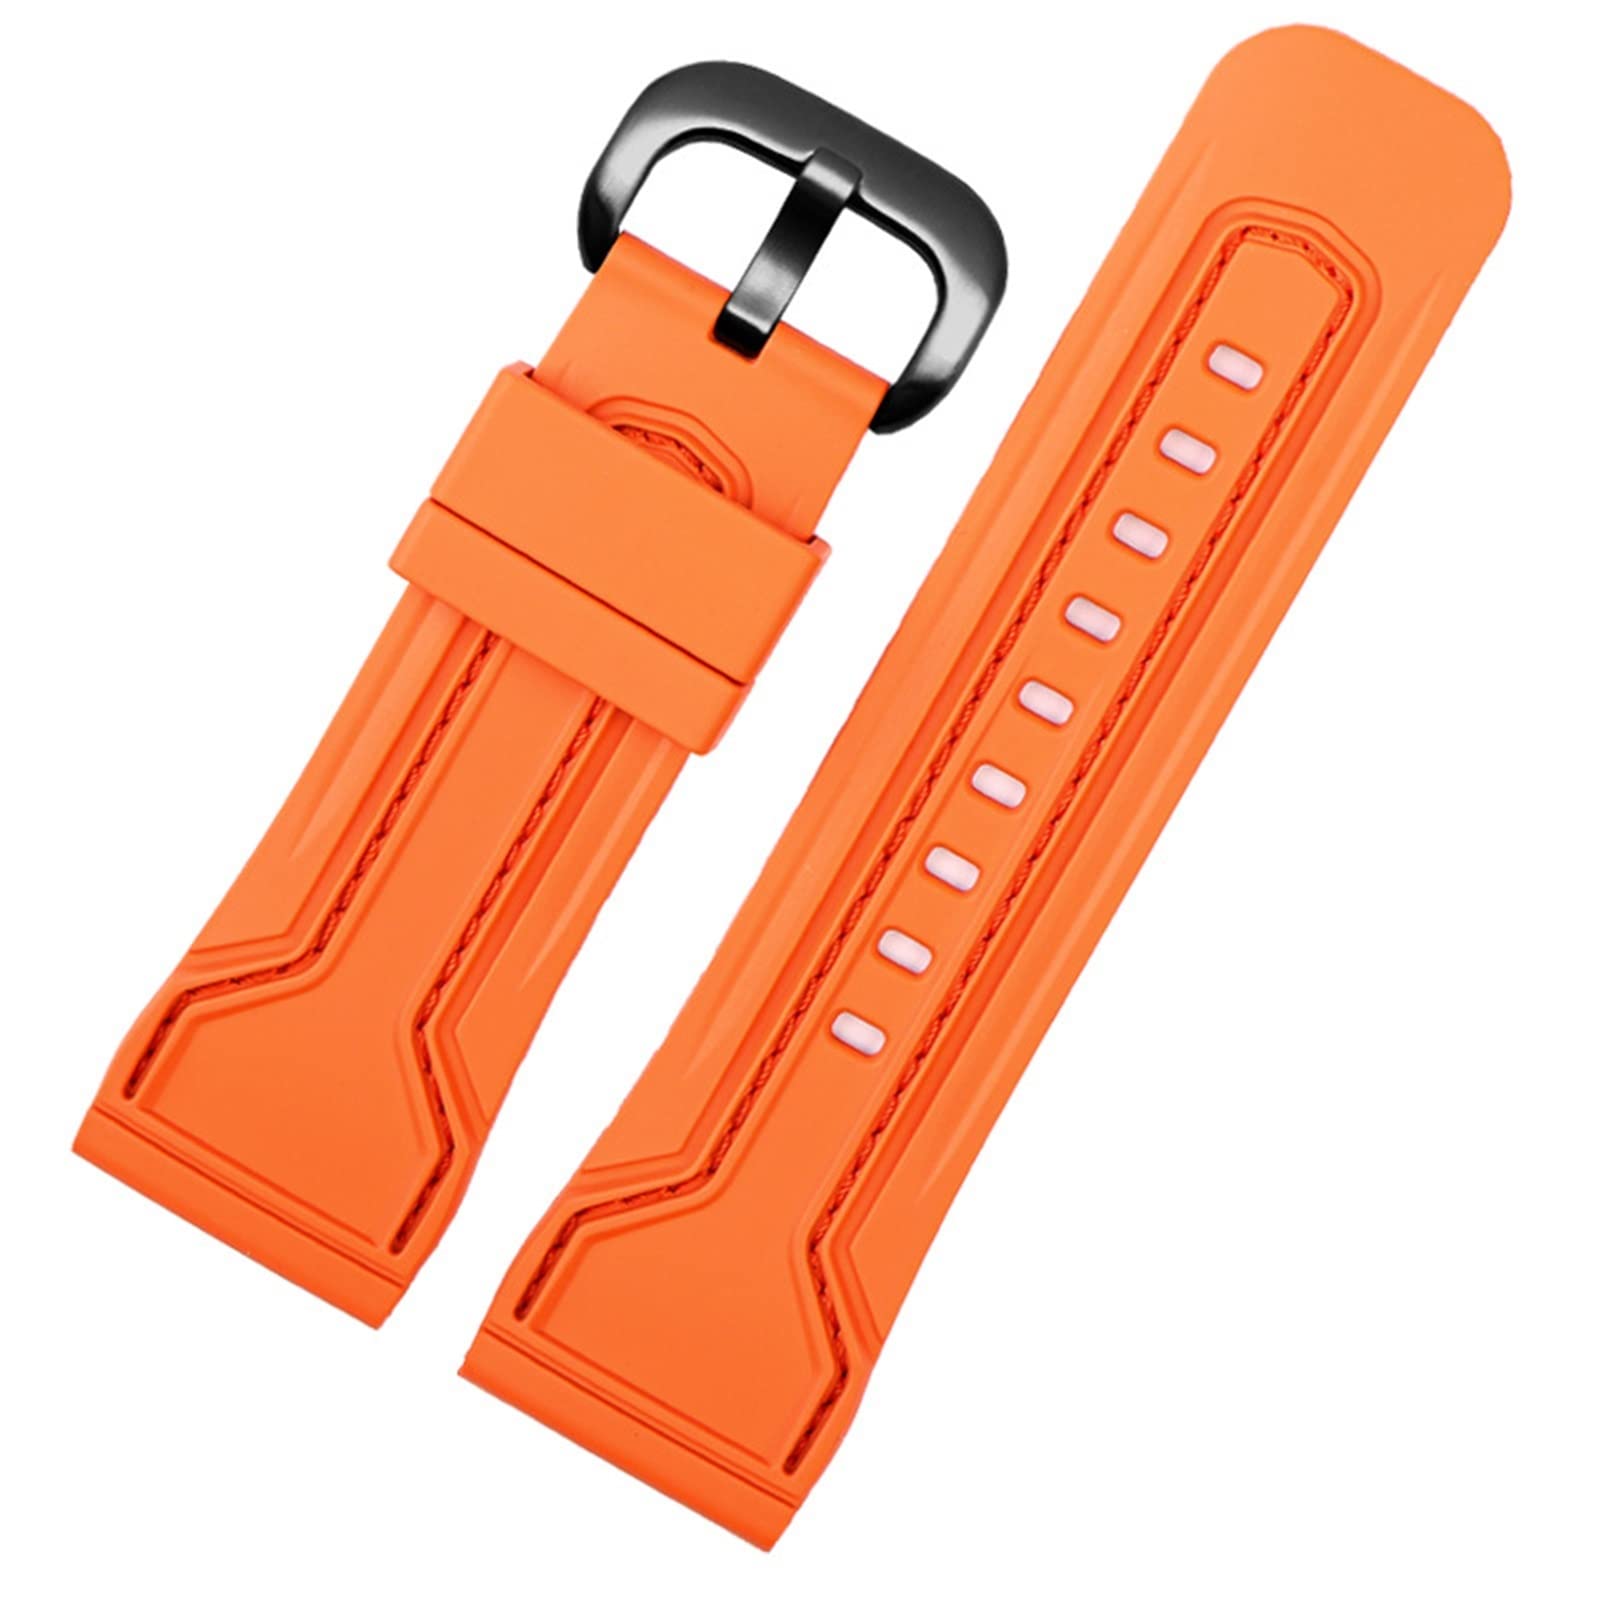 EEOMOiK Silicone Watch Band 28mm Watchbands for Seven on Friday Strap Silicone Rubber Watch Accessories Waterproof Wrist Band Bracelet Belt (Color : Orange-Black Buckle, Size : 28mm)